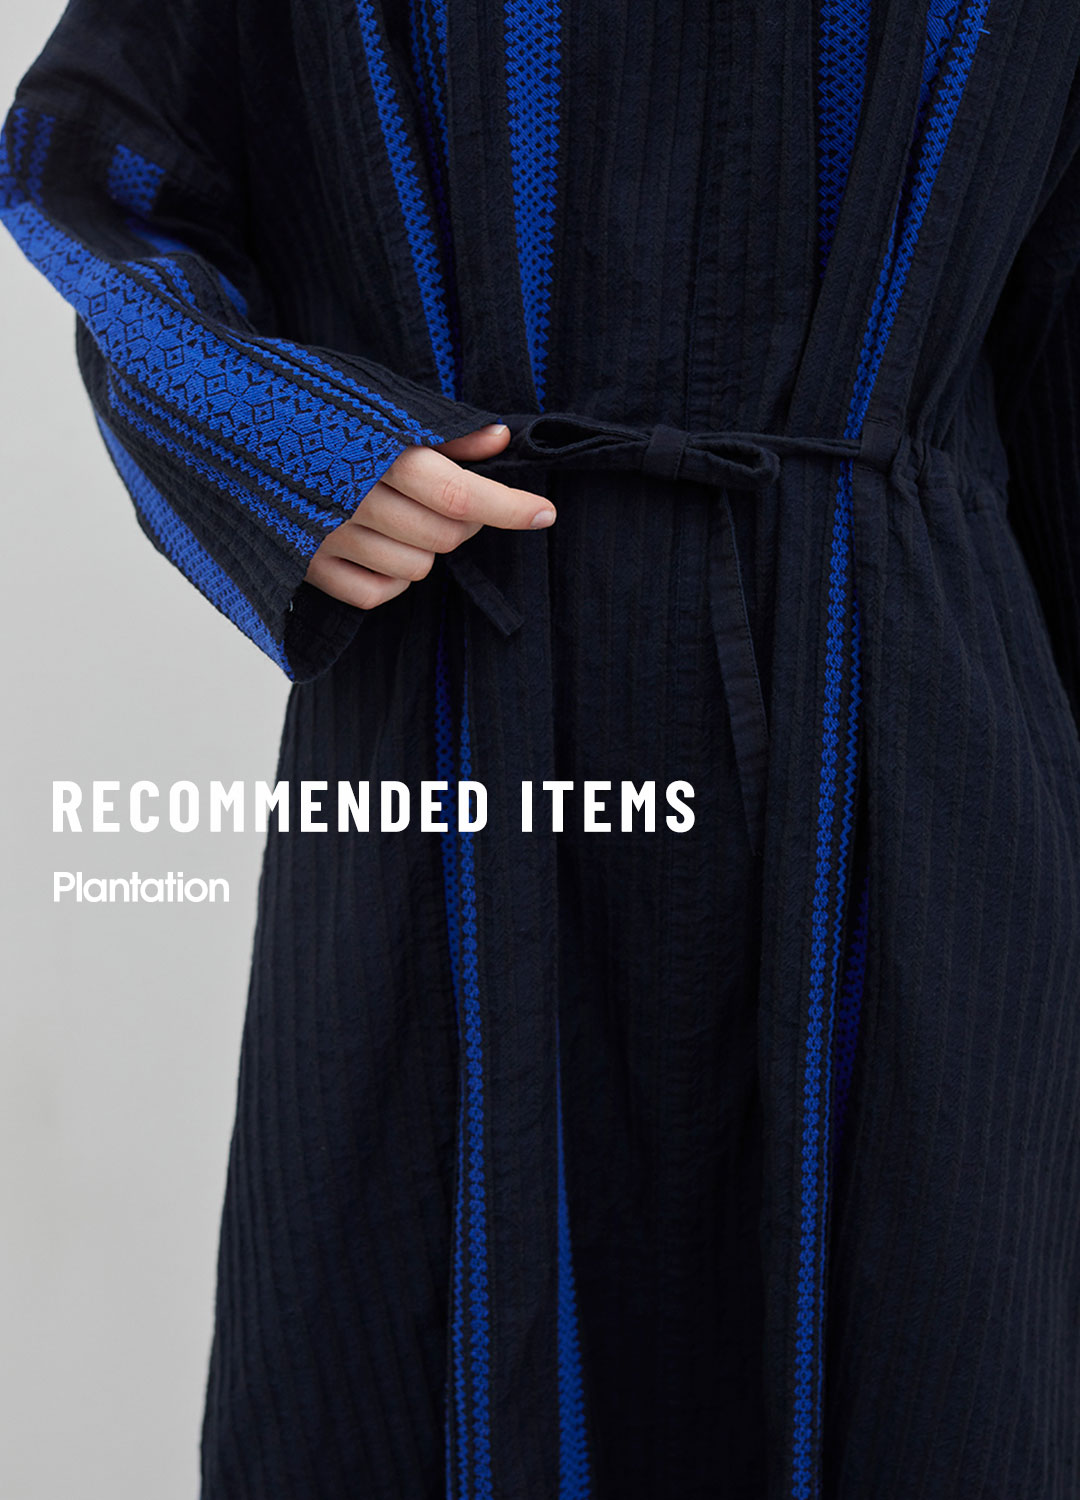 RECOMMENDED ITEMS Plantation